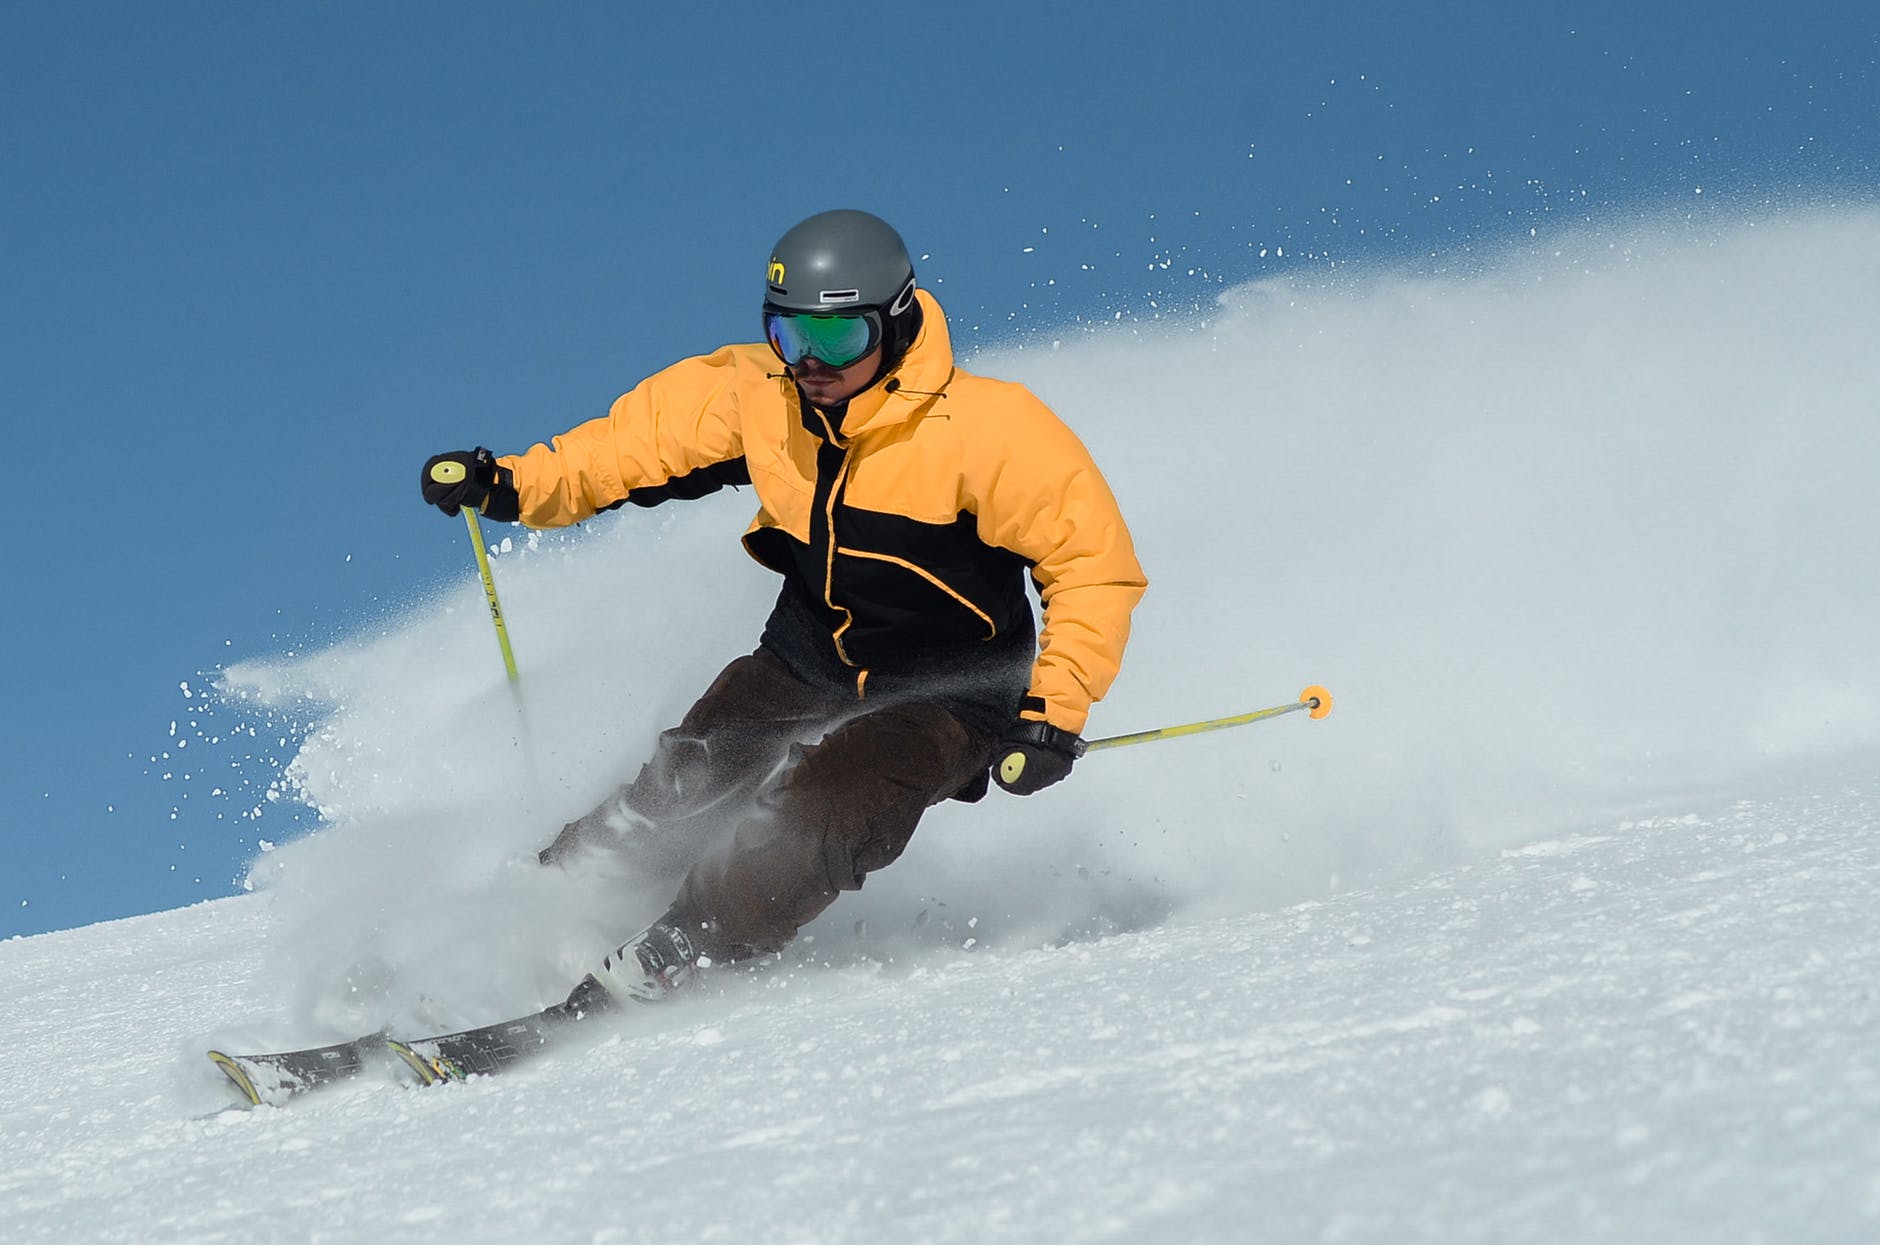 Safety tips to enjoy winter sports